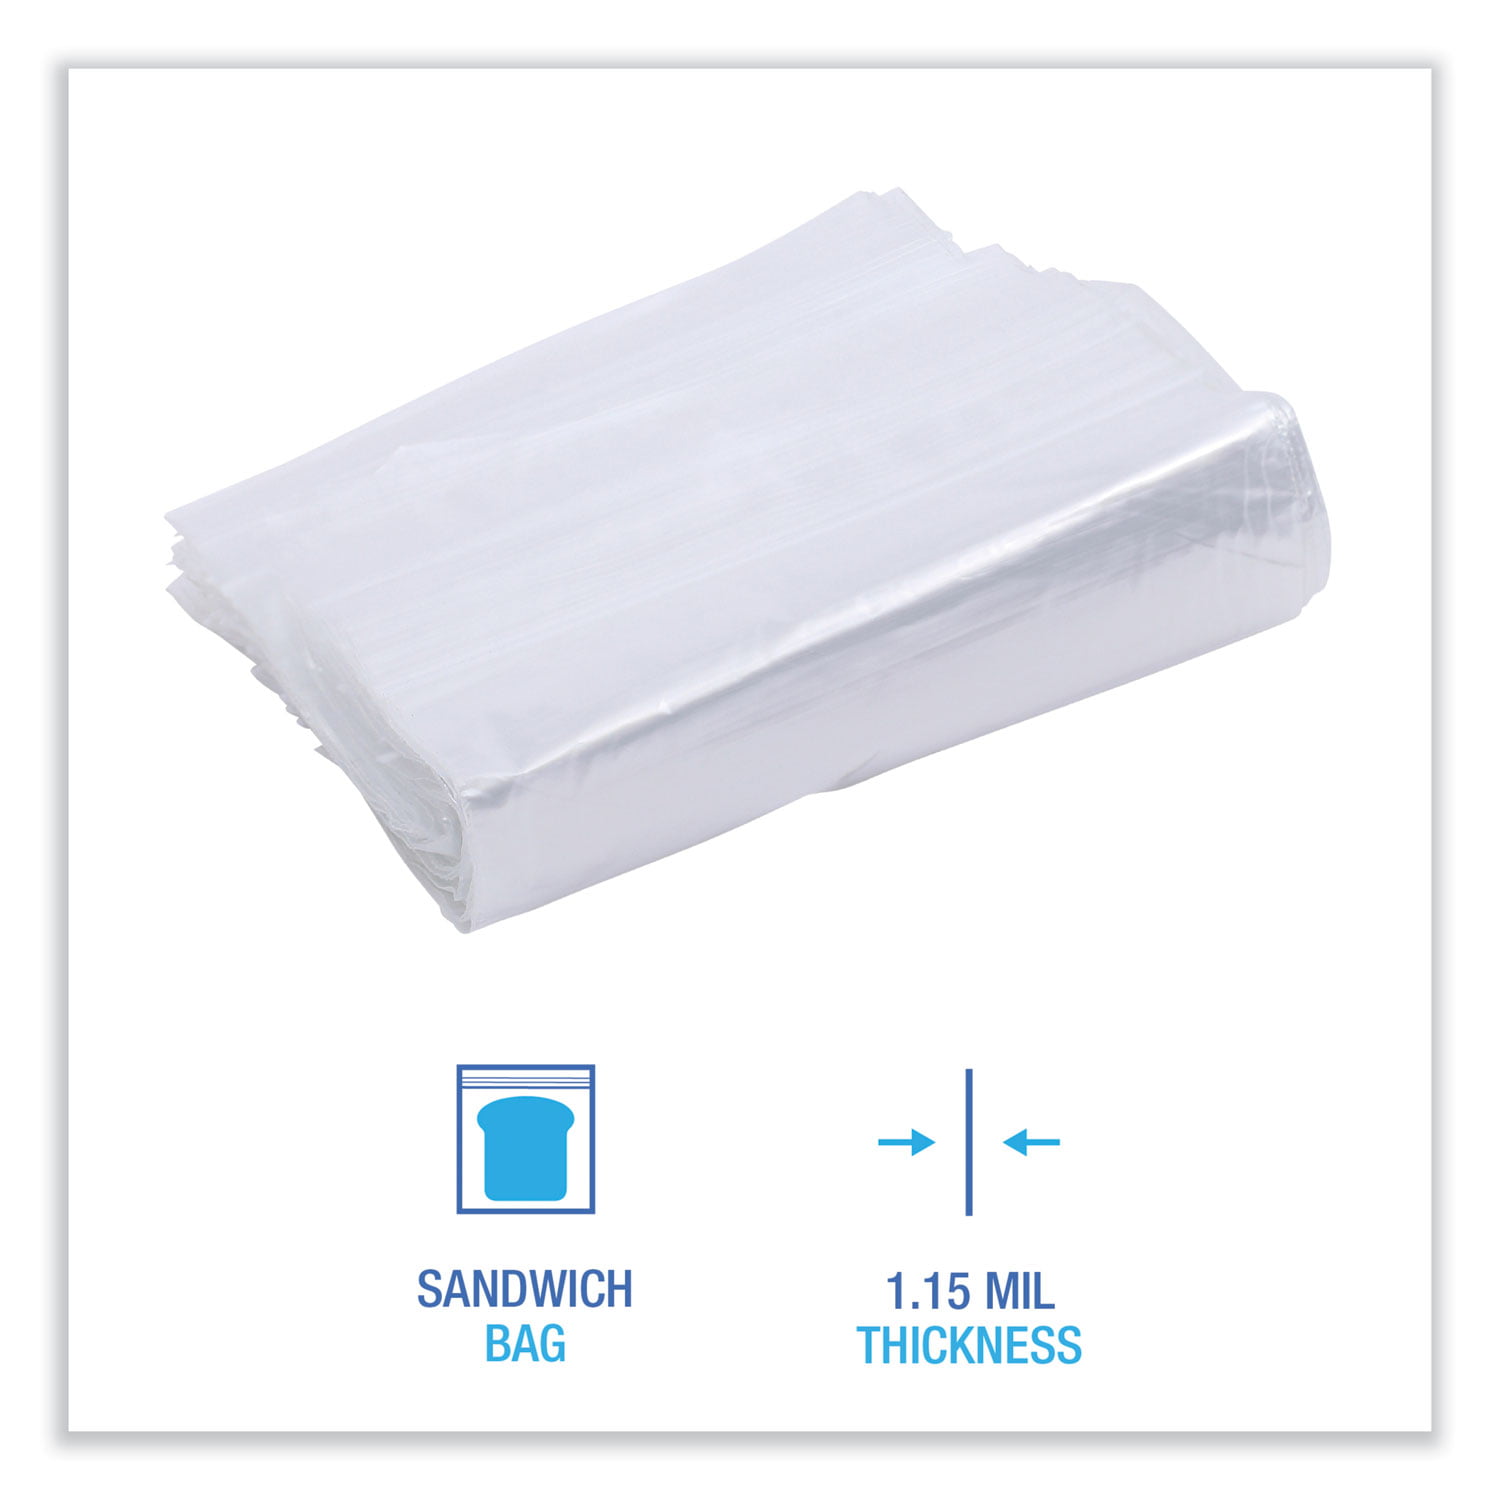 CRYOVAC SANDWICH BAG RESEL 1-500 COUNT*Pack Size =1-500 COUNT-#100946910